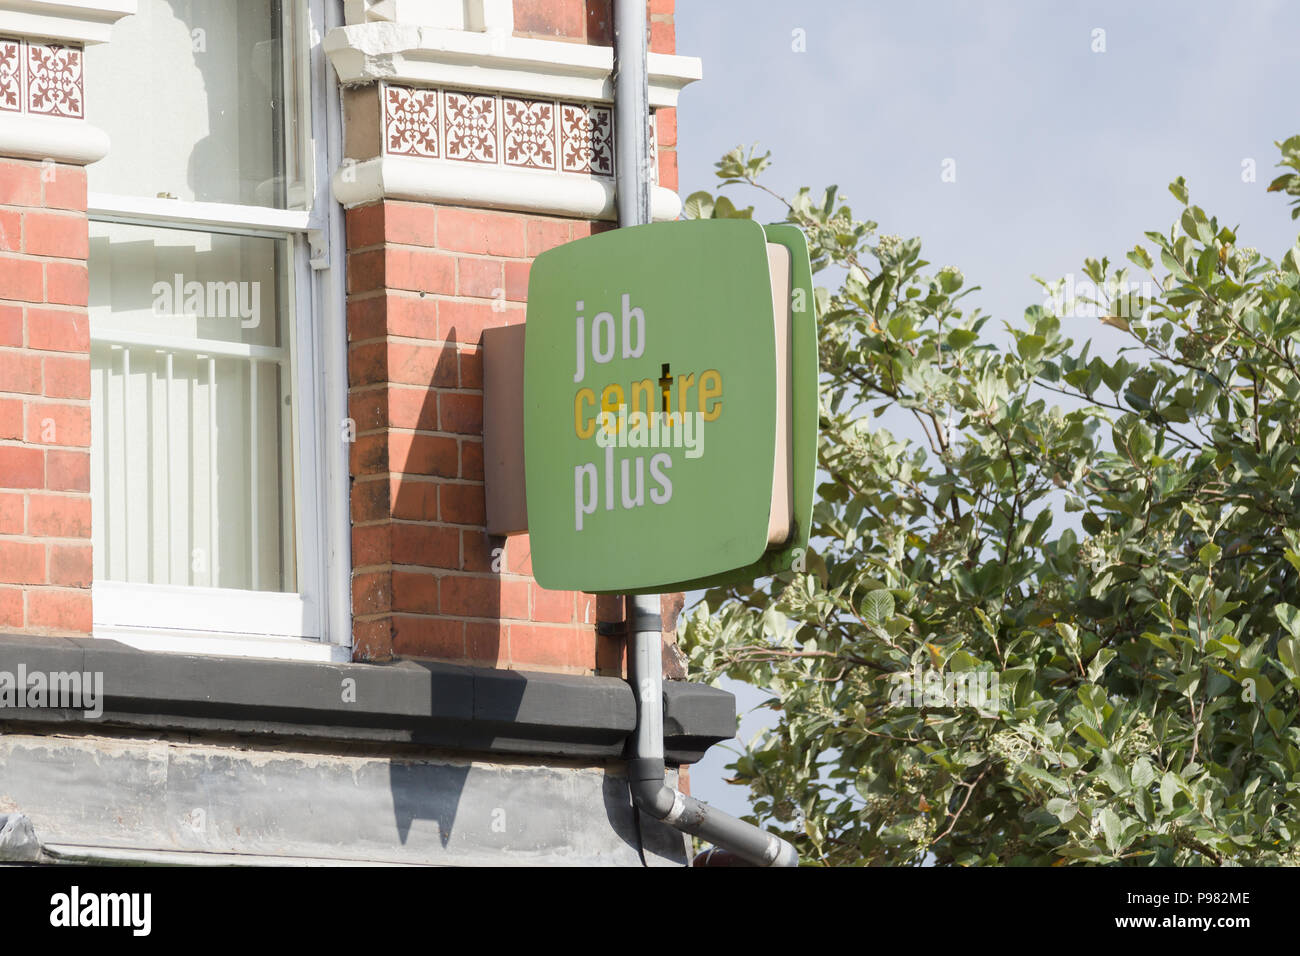 Job Centre Plus an agency of the British Department for Work and Pensions providing community and social welfare Stock Photo